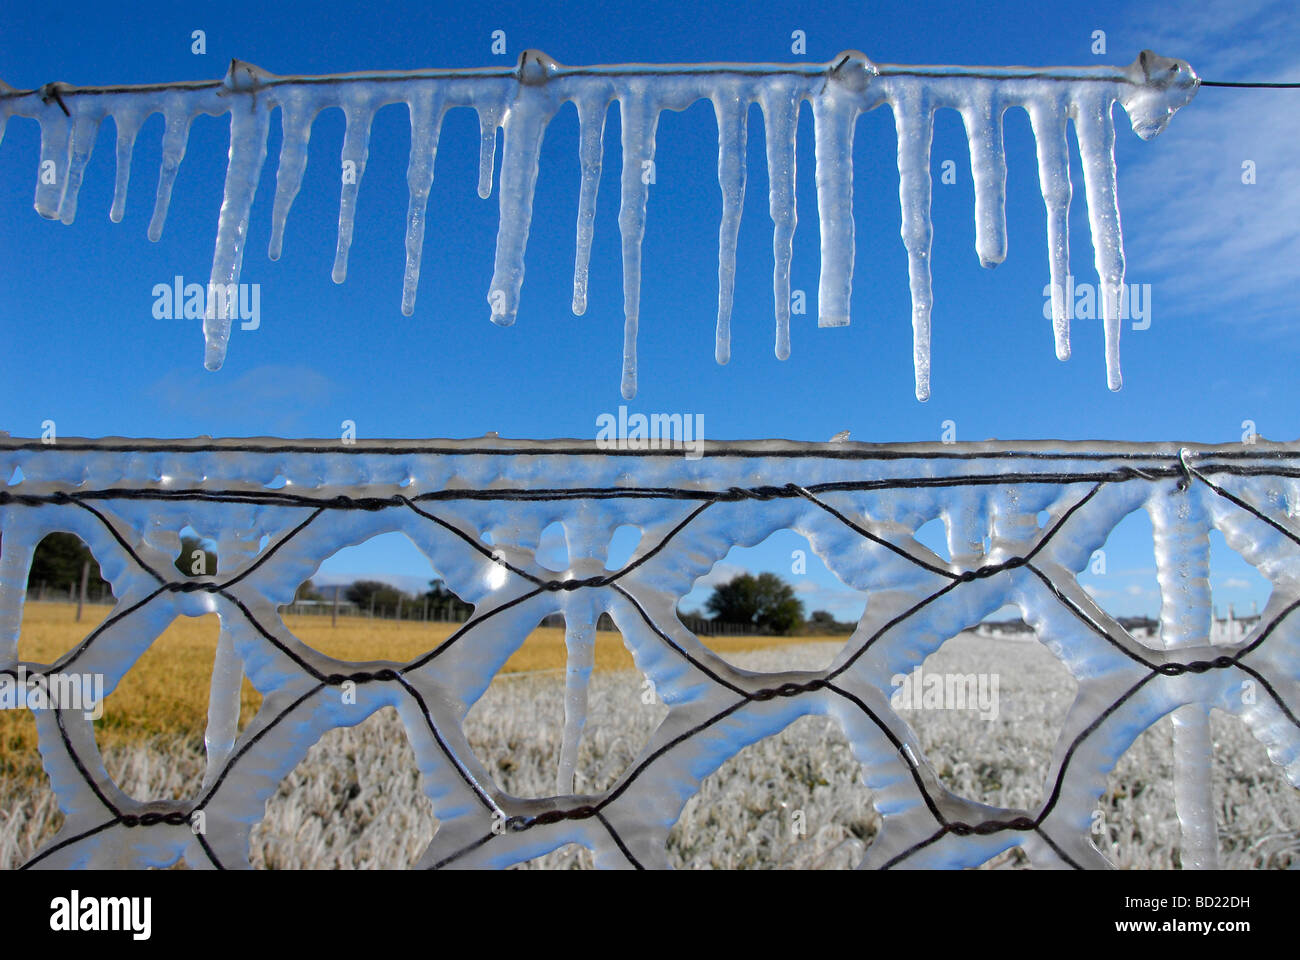 Heavy frost forms icicles on landscape in Free State, South Africa. Winter lasts from April to August in the Southern Hemisphere Stock Photo